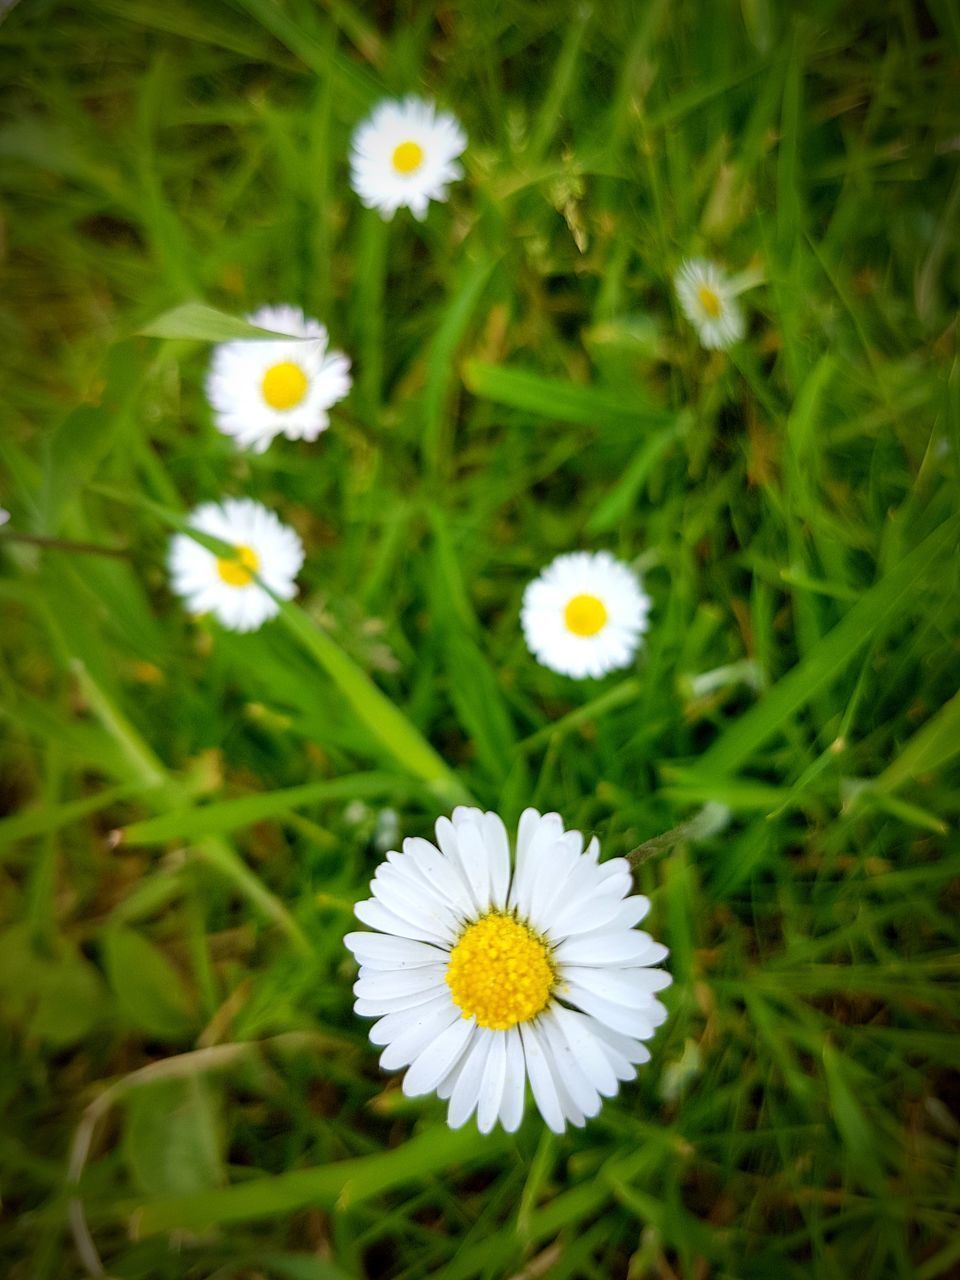 HIGH ANGLE VIEW OF WHITE DAISY FLOWER ON FIELD